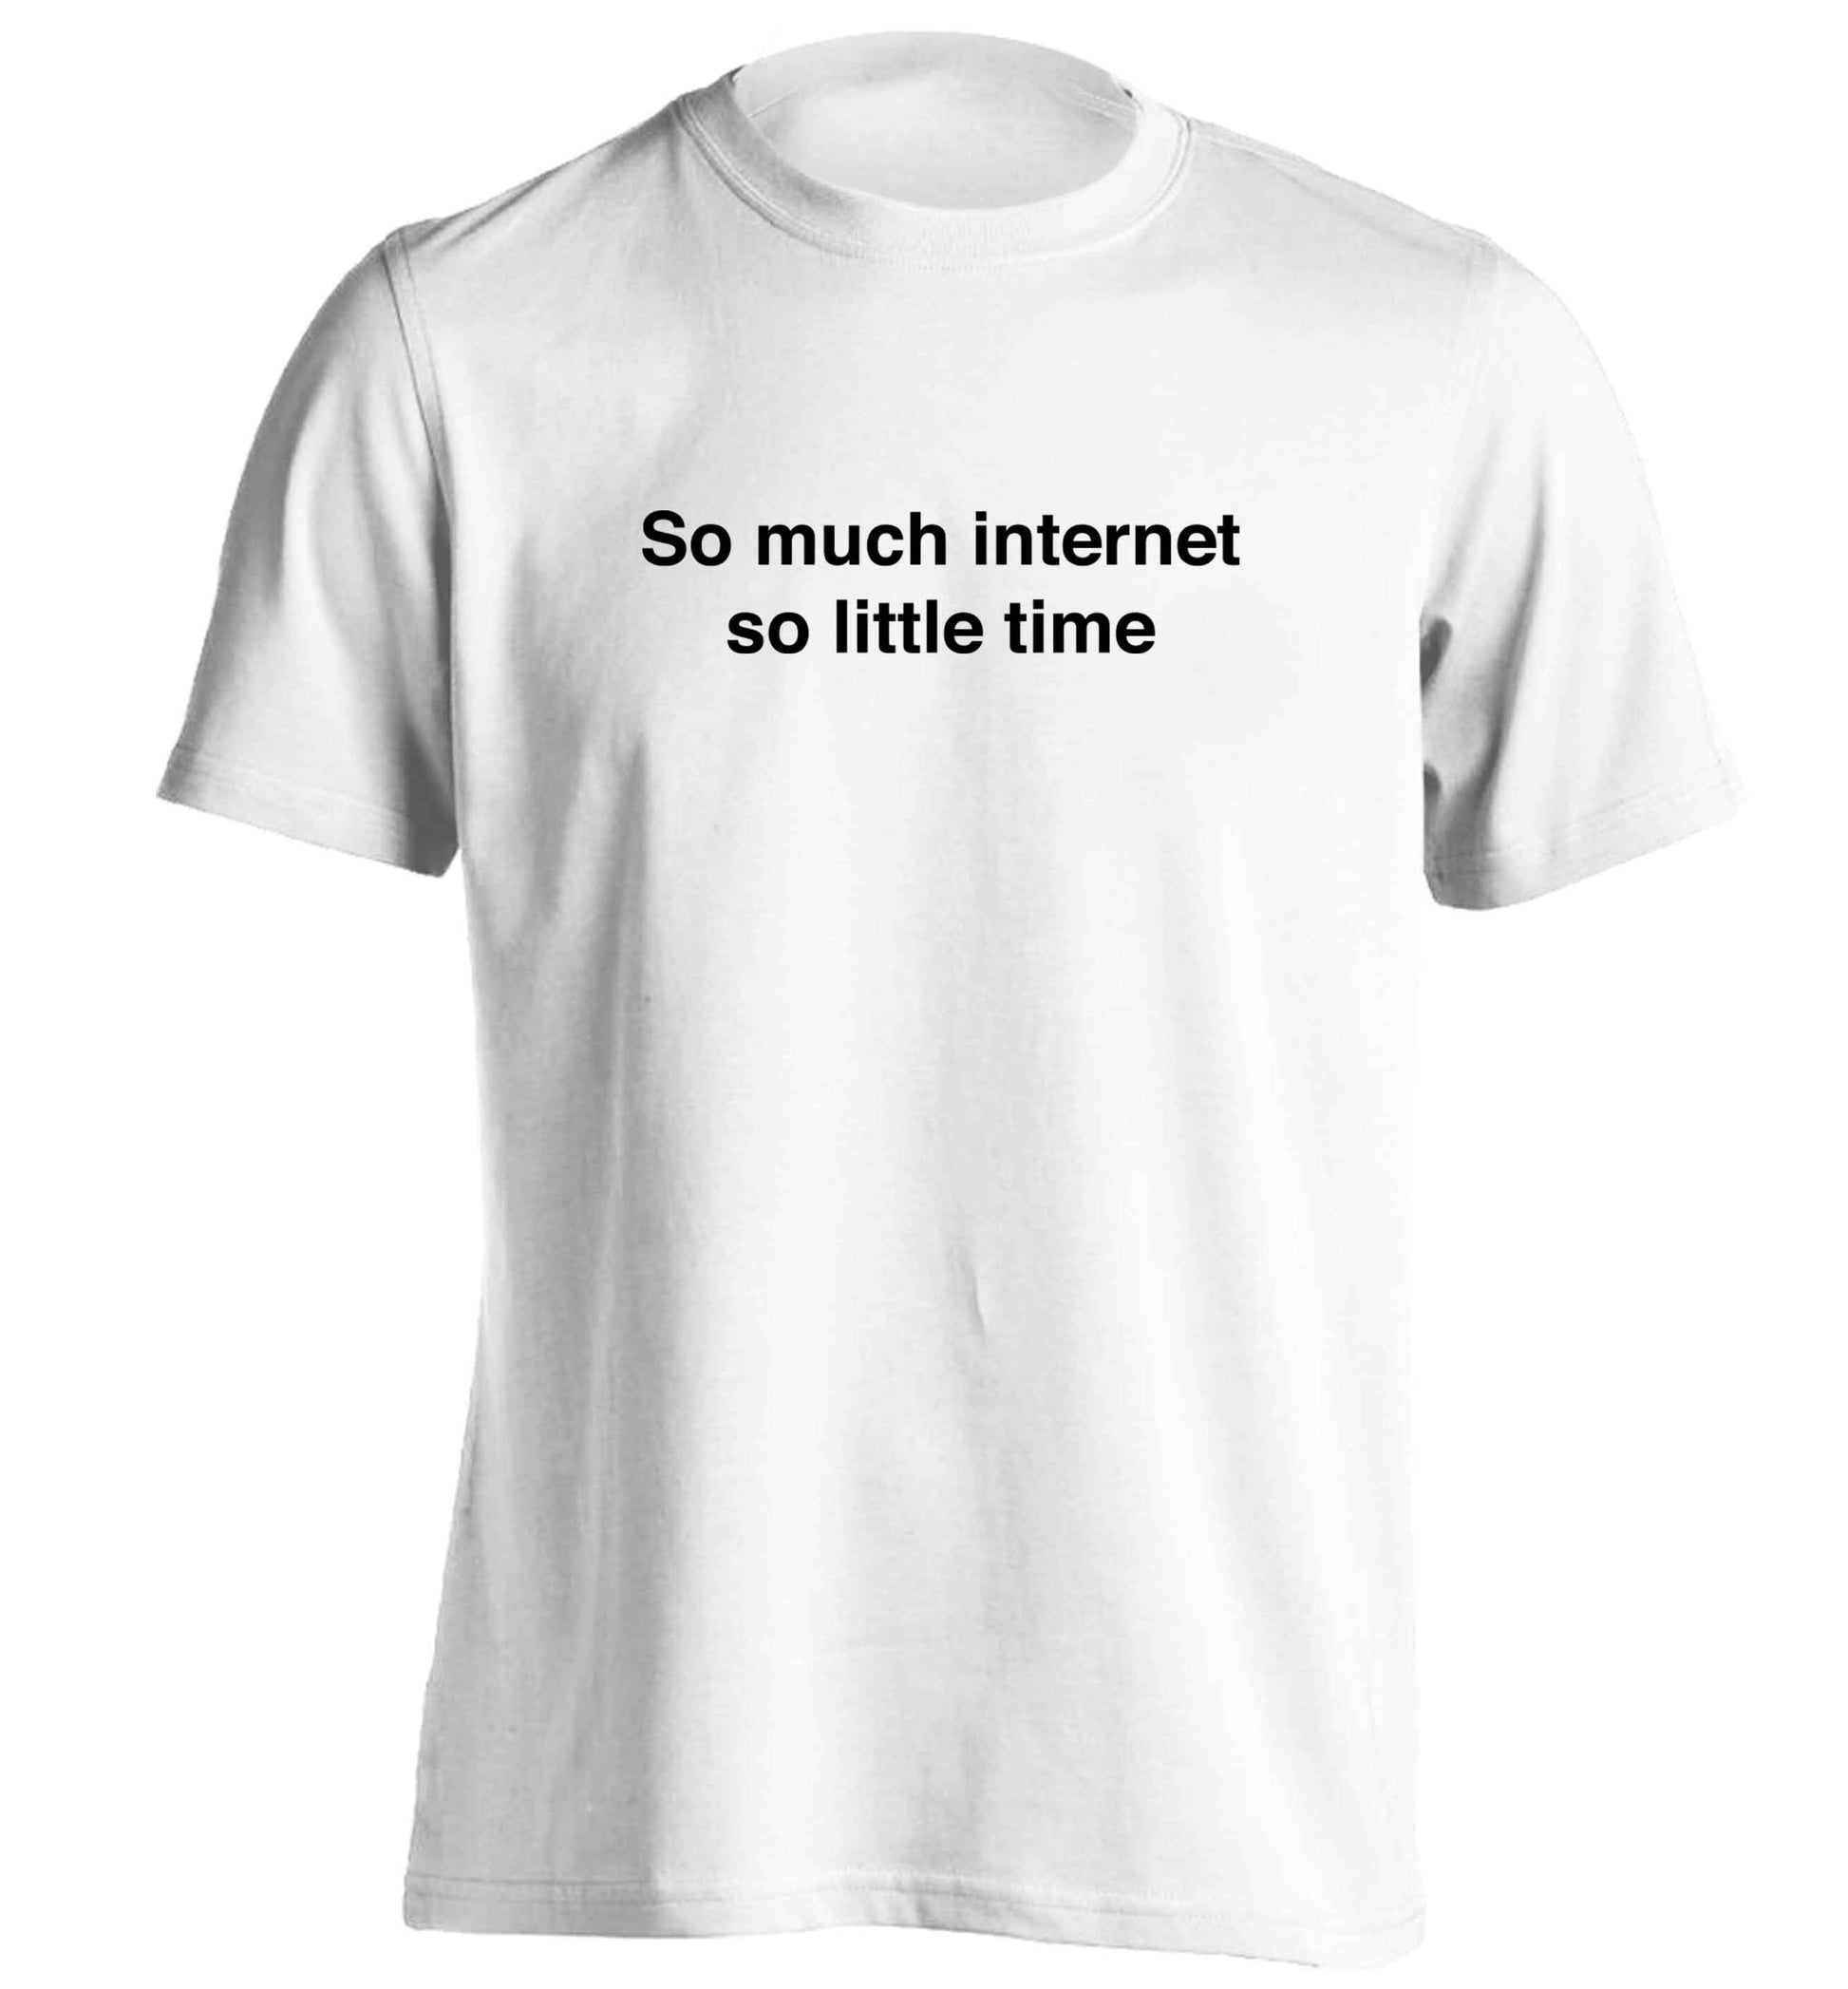 So much internet so little time adults unisex white Tshirt 2XL